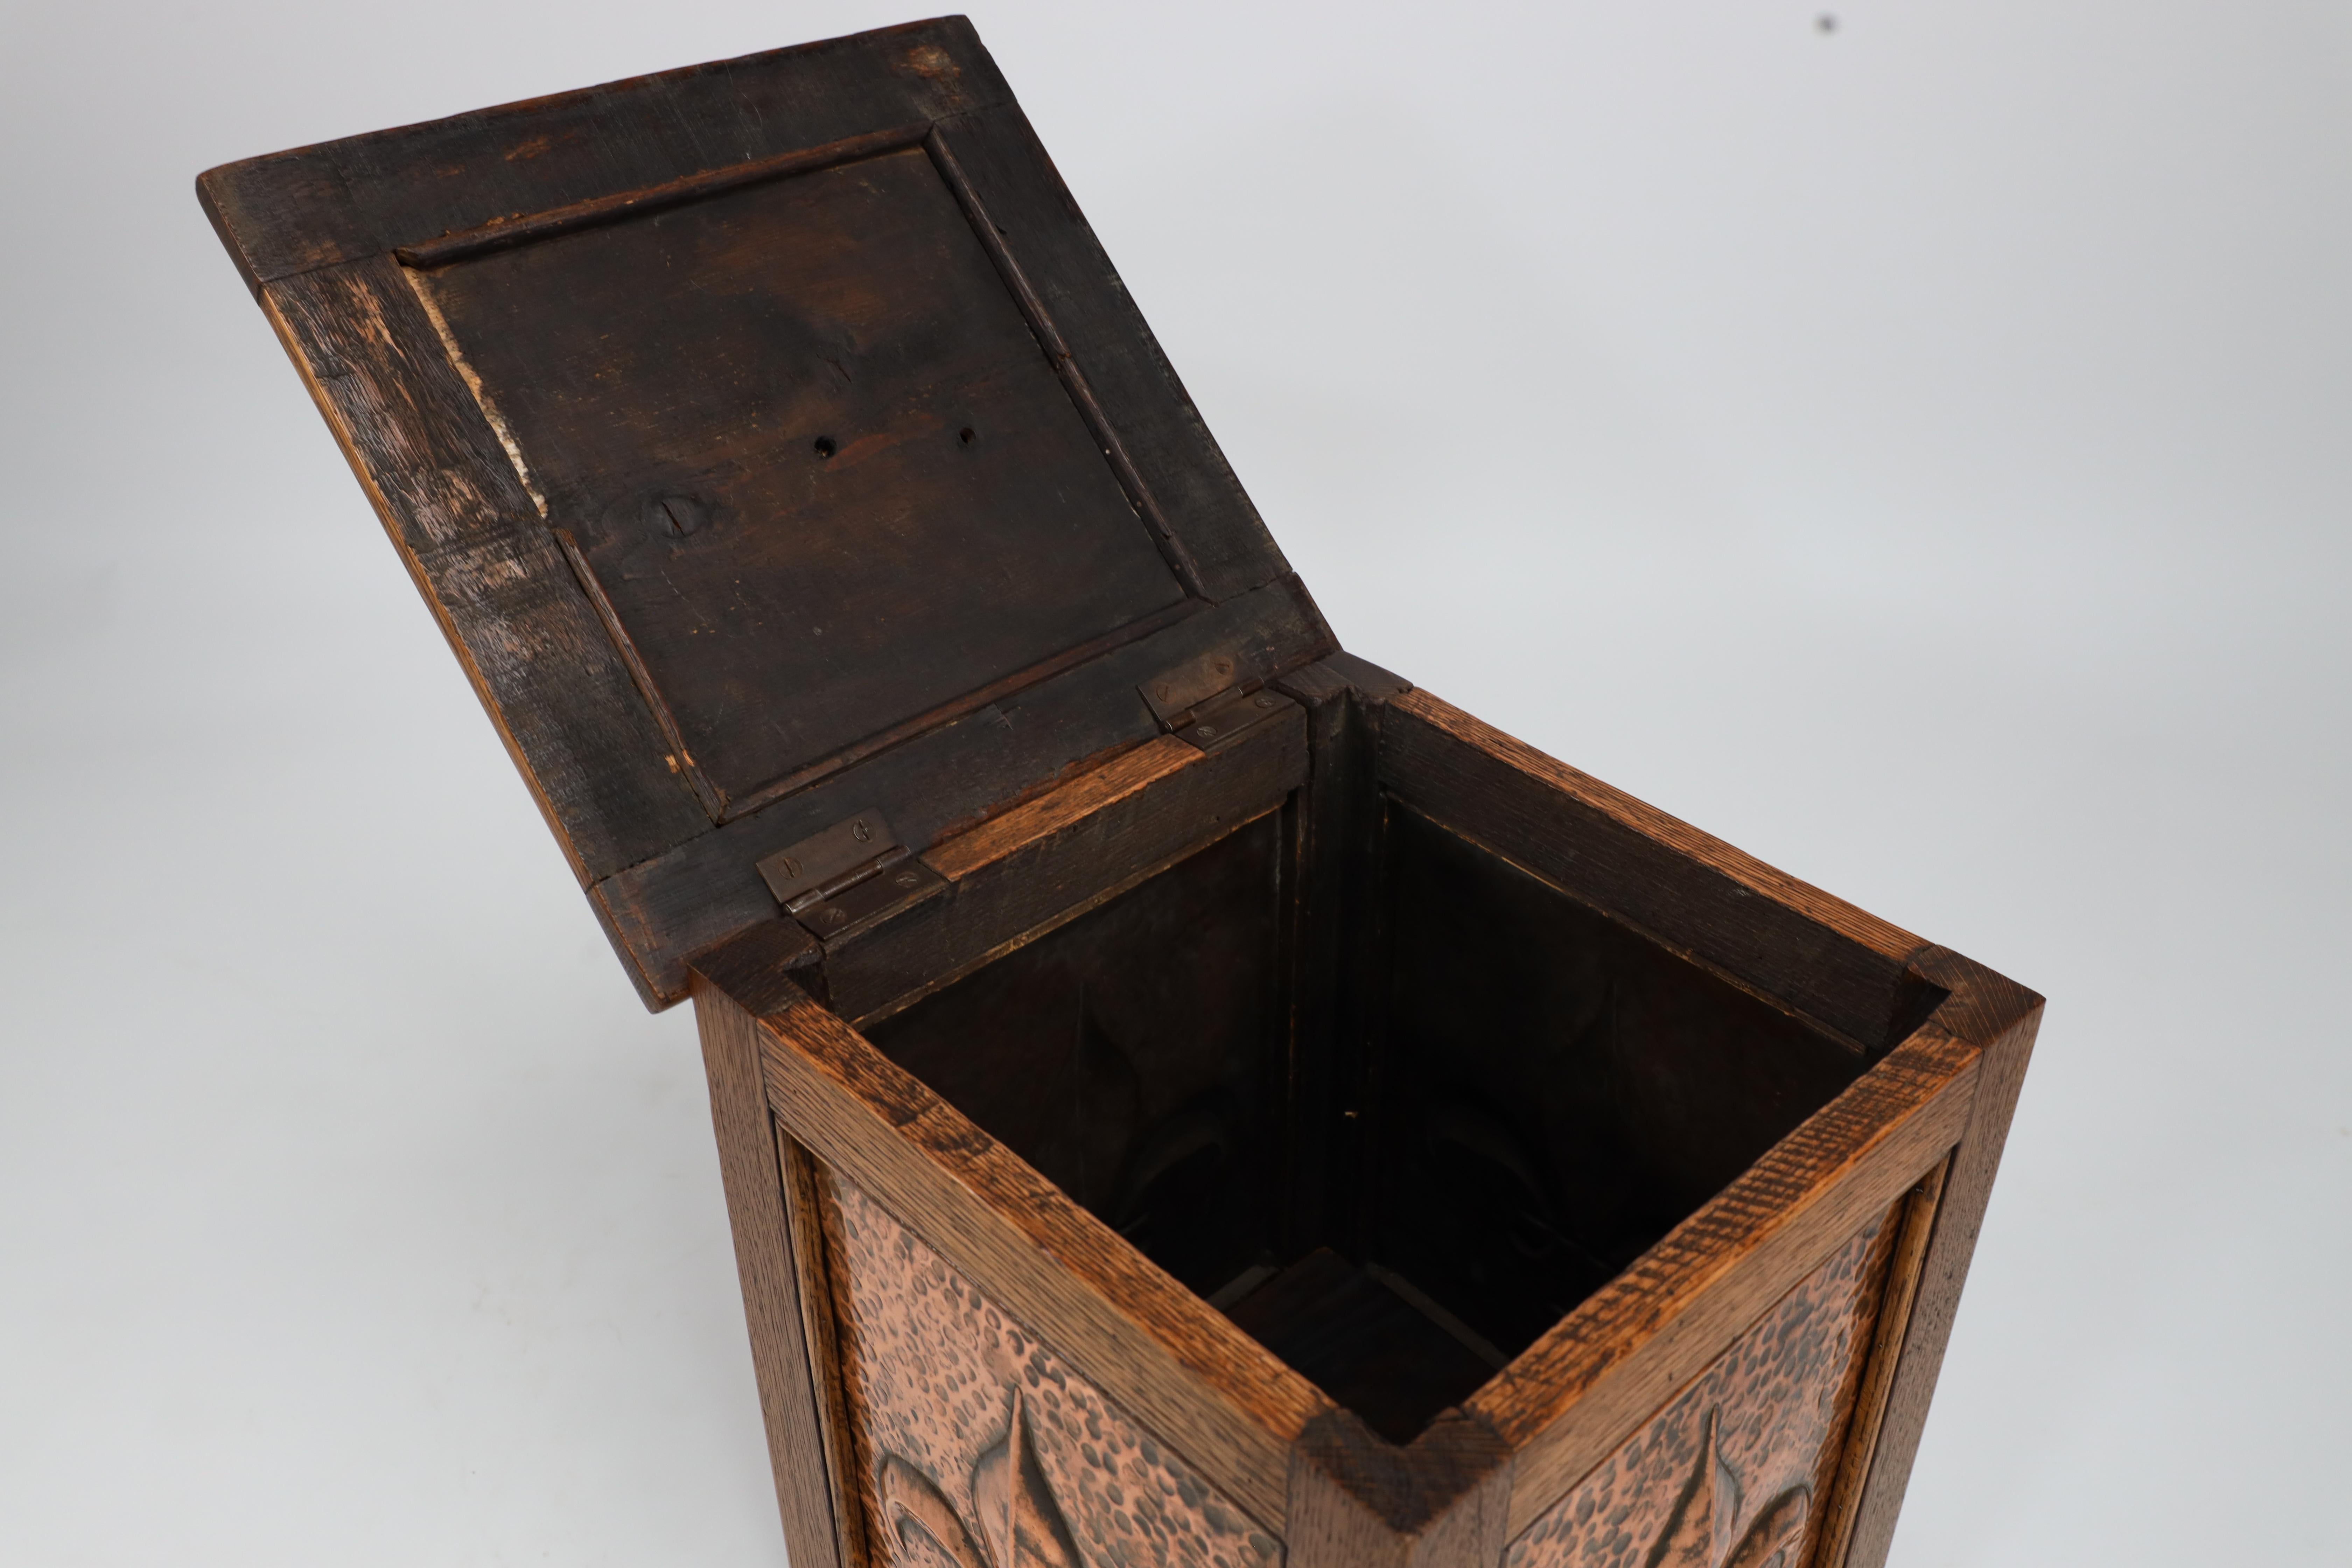 John Pearson attri. An Arts and Crafts log or coal box with Fleur De Lys details For Sale 5